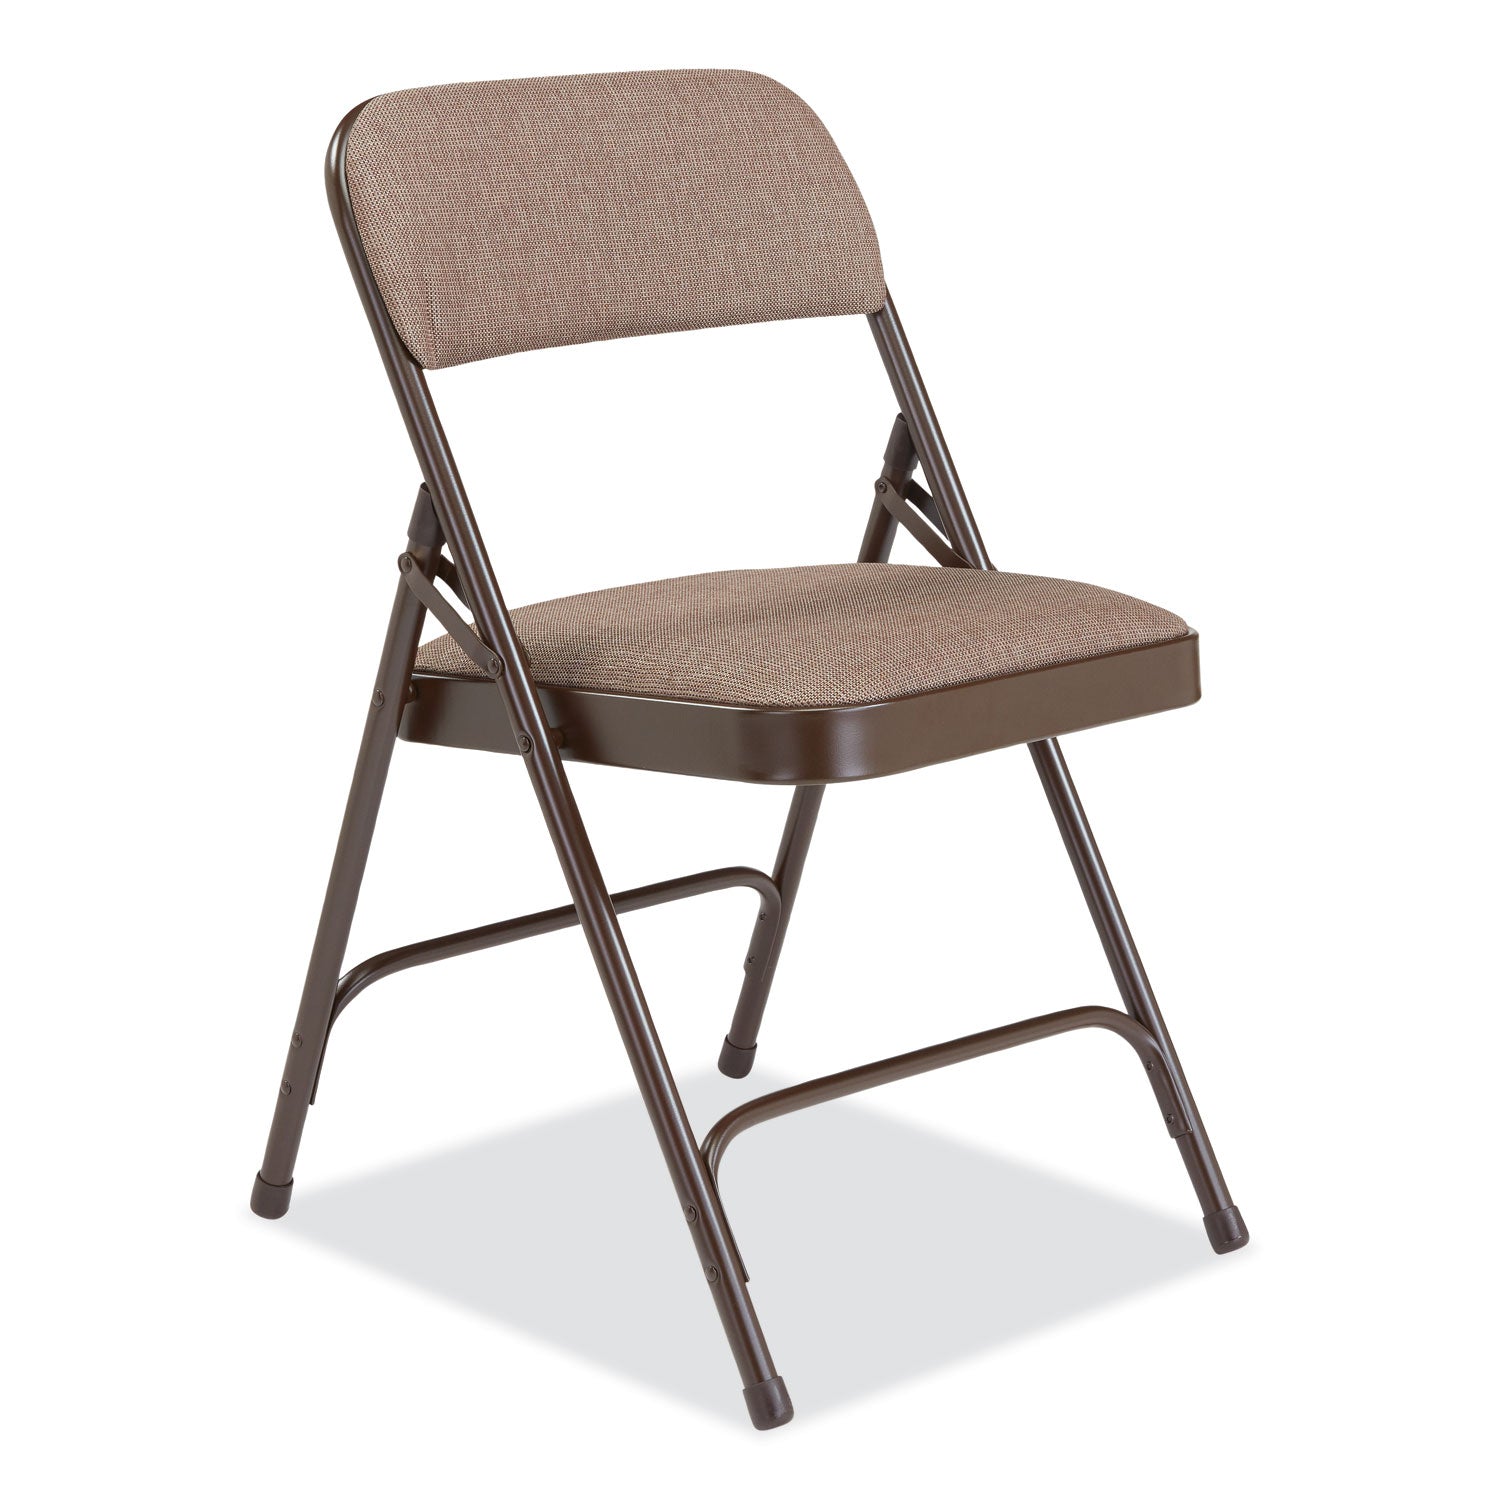 2200-series-fabric-dual-hinge-premium-folding-chair-supports-500-lb-walnut-seat-back-brown-base4-ctships-in-1-3-bus-days_nps2207 - 2